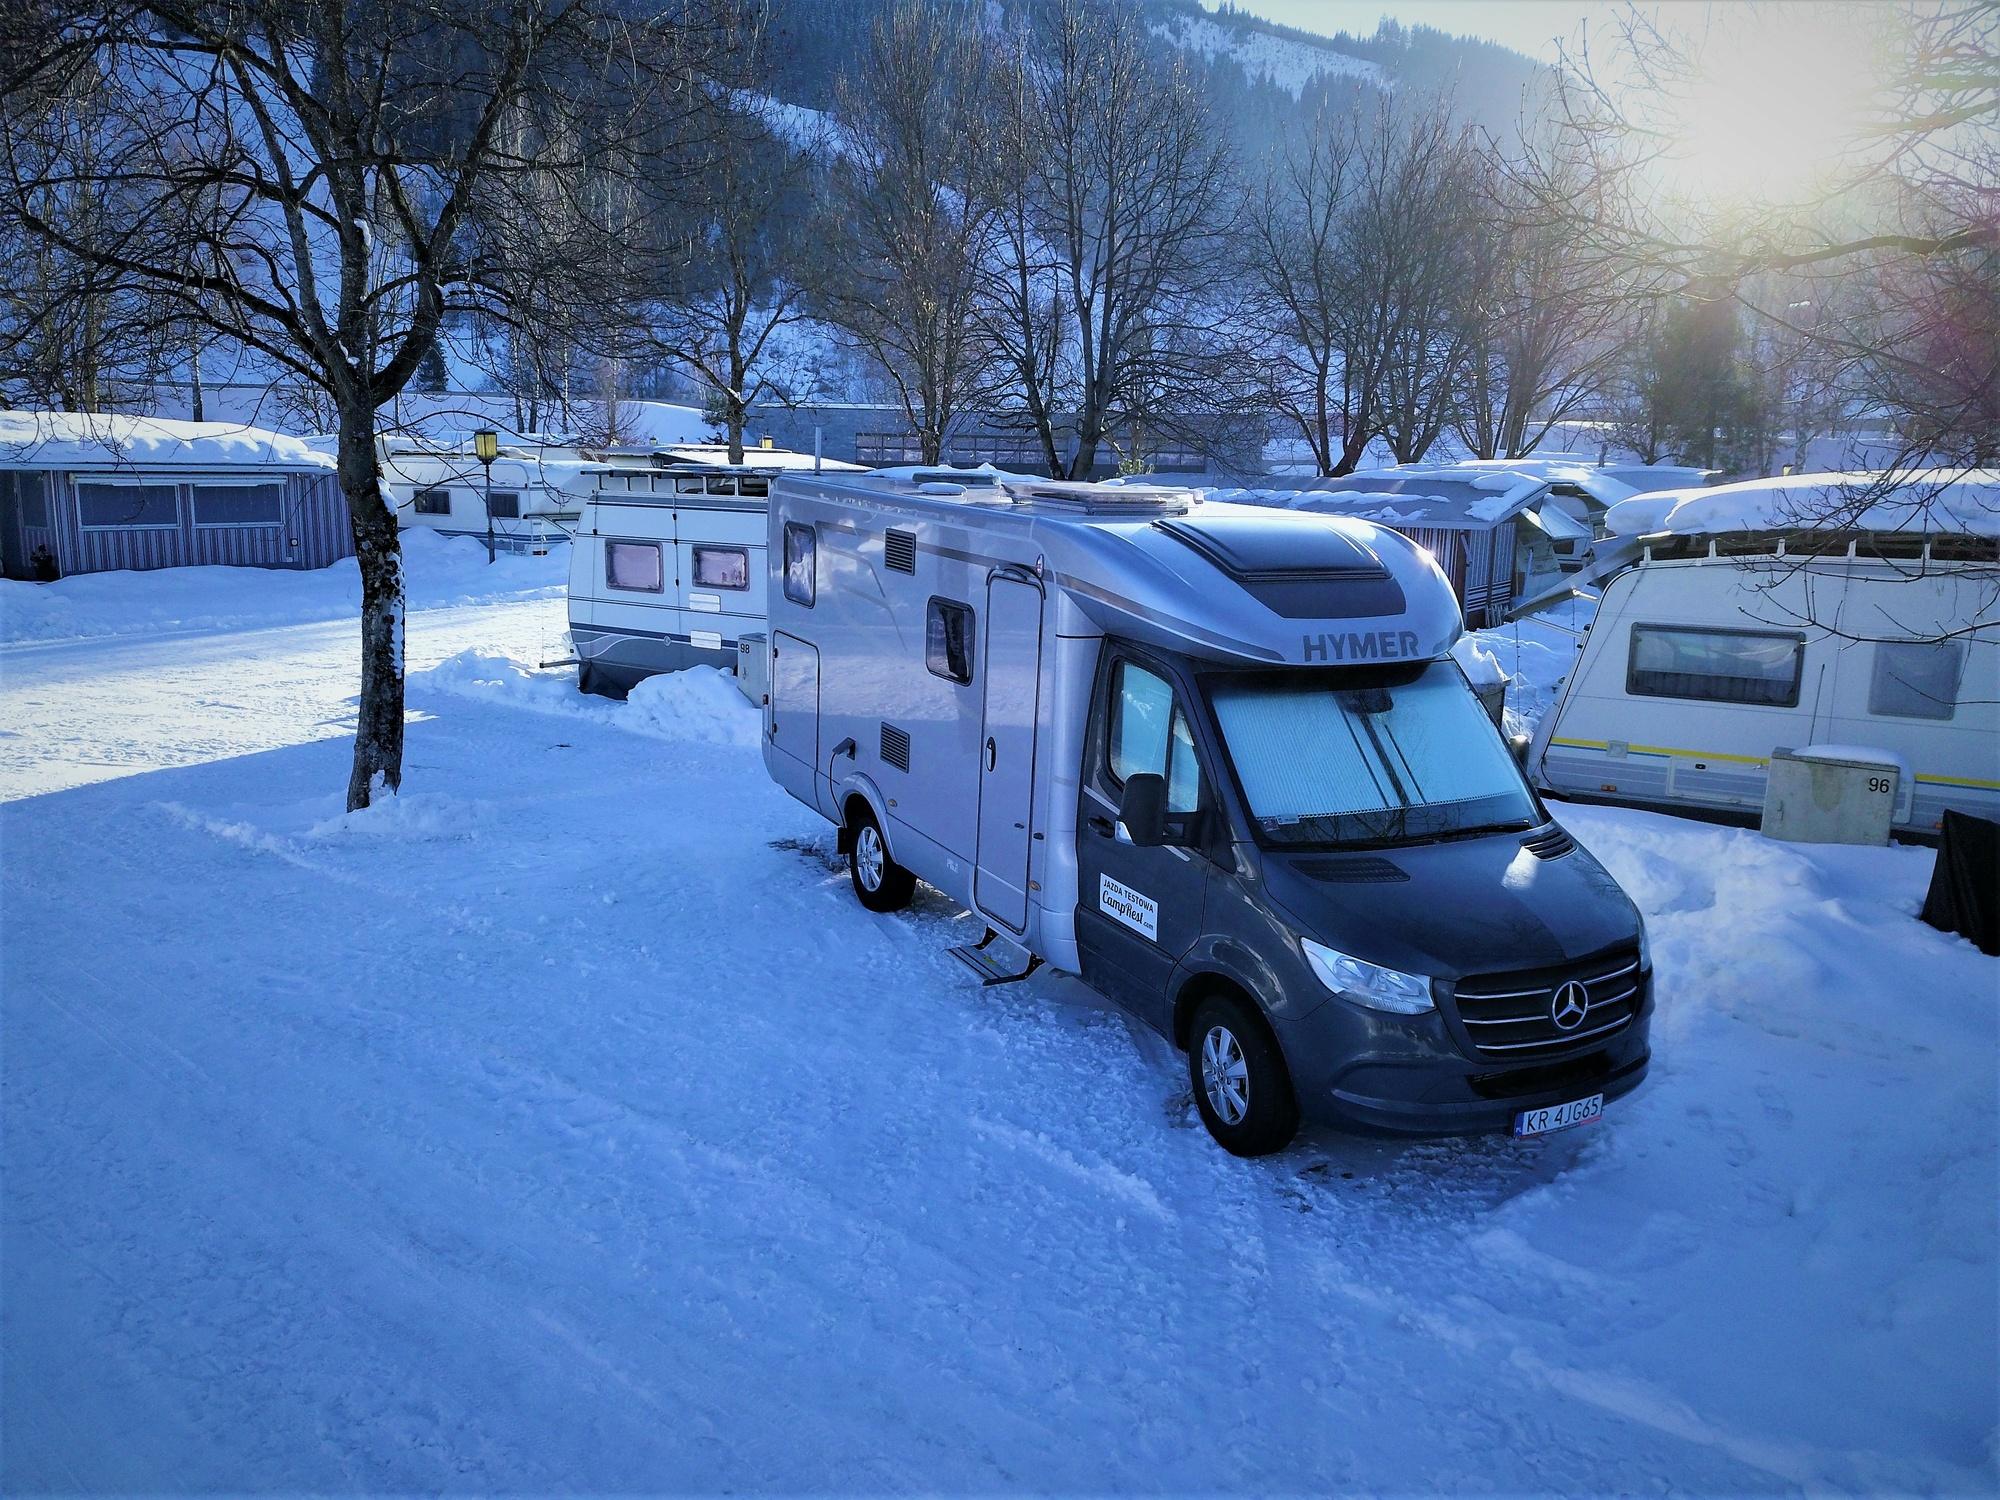 Winter caravanning guide for beginners – image 1